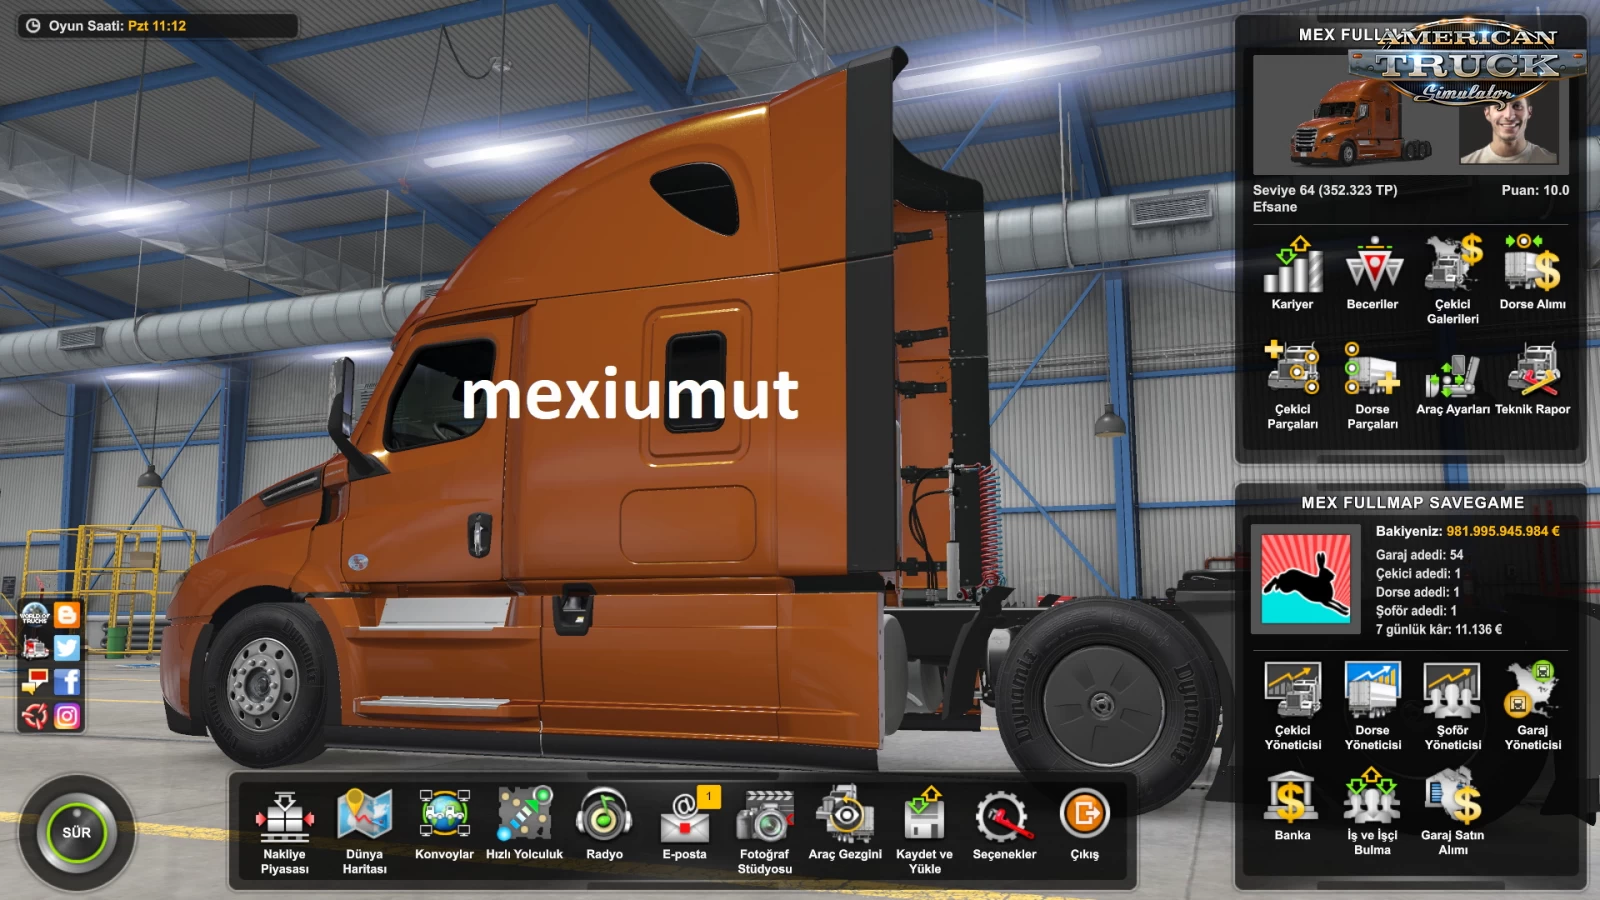 Full Save Game (Full Map DLC) v1.1 by Mexiumut for ATS